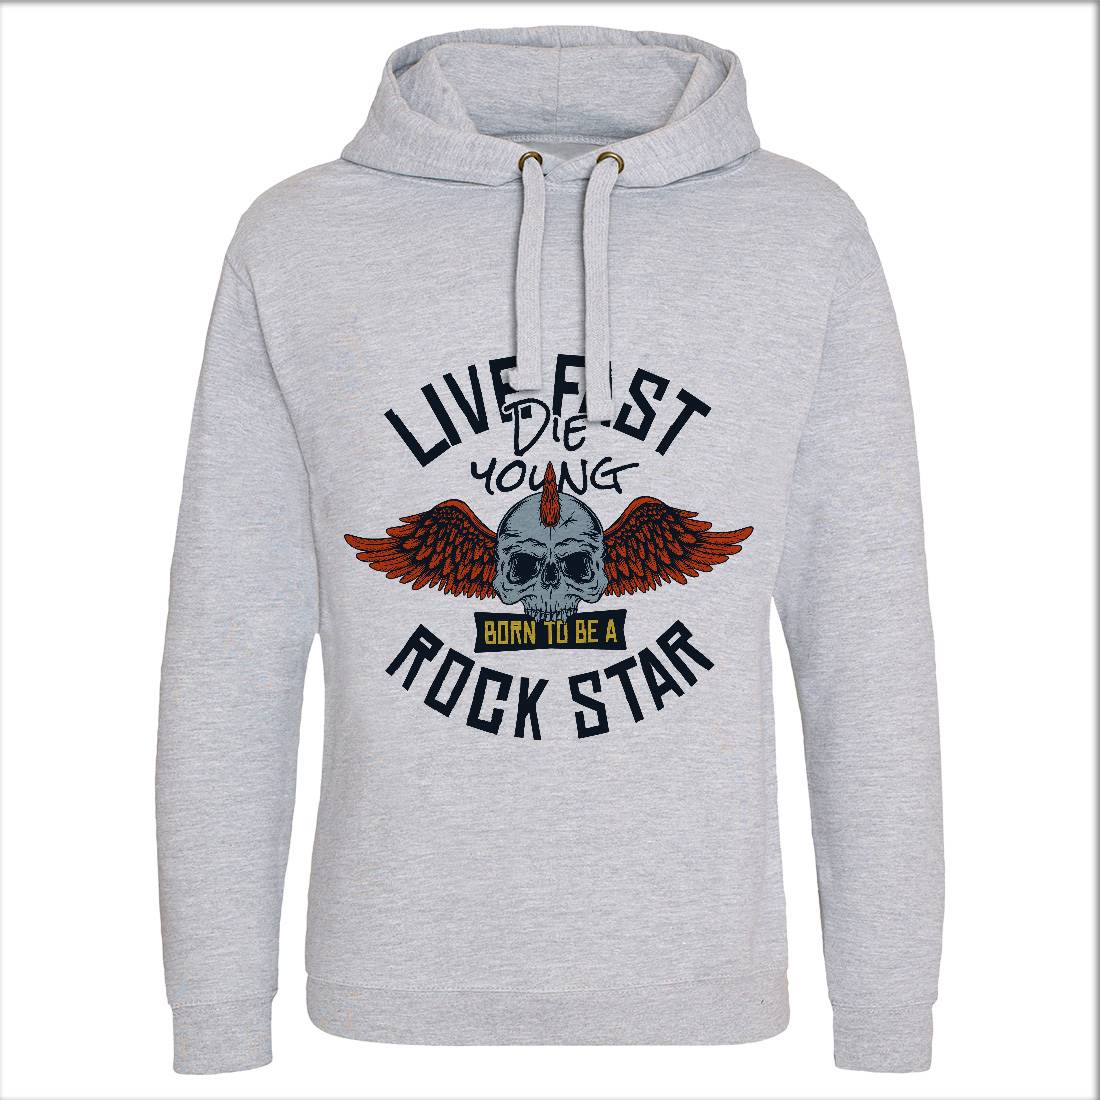 Live Fast Mens Hoodie Without Pocket Music D954